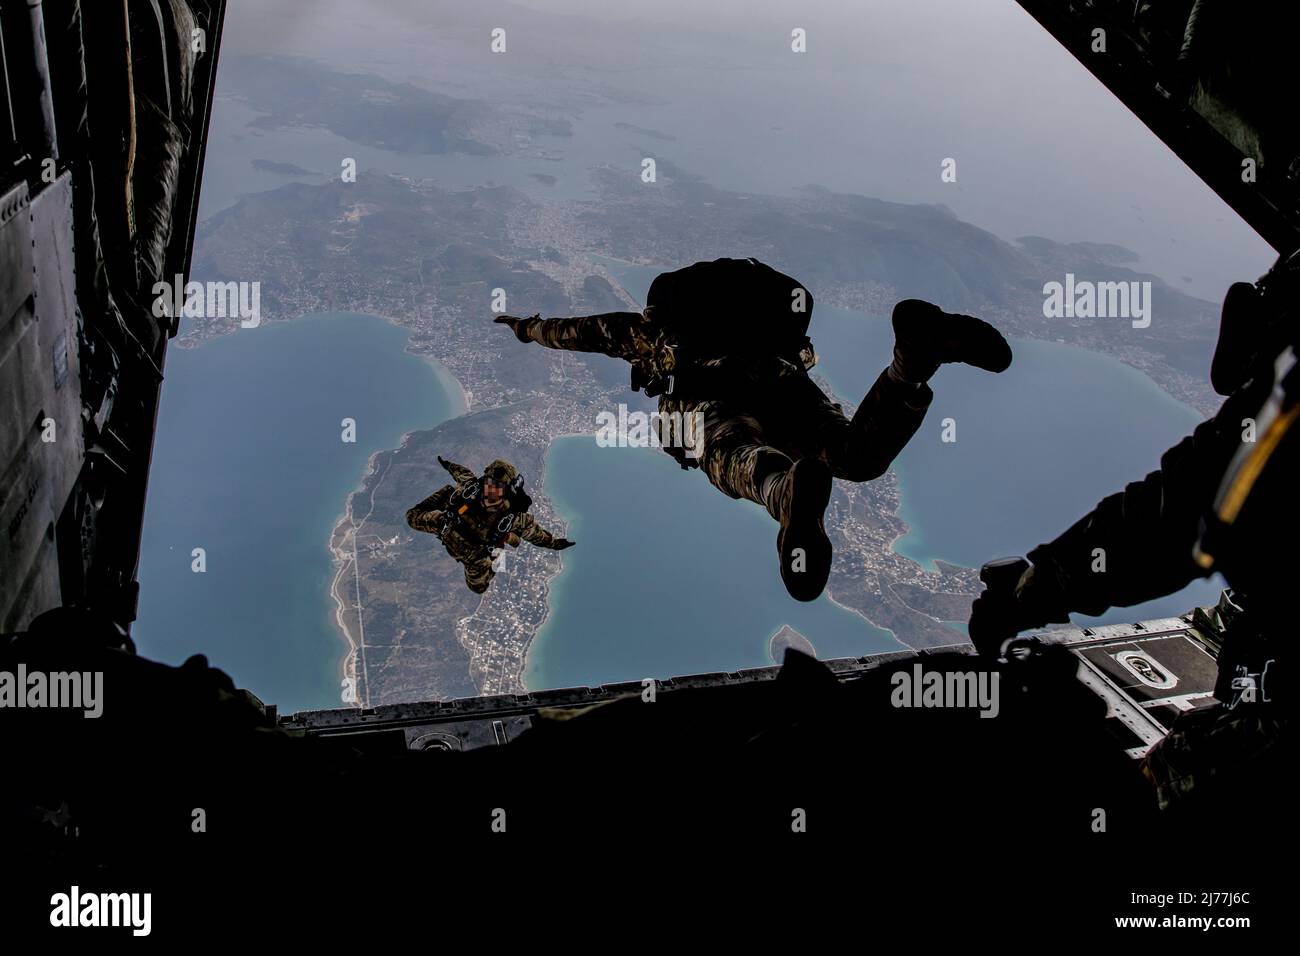 Members of Greek Special Forces (SOF) prepare for Exercise Orion as they jump from the ramp of a Greek Air Force C-130 aircraft during airborne operation over a coastal area near Elefsina, Greece, March 30, 2022. Exercise Orion reinforces Greece as a regional SOF leader, enhances interoperability across multiple domains, and strengthens relationships with NATO and non-NATO partners. The exercise focuses on highlighting operational capabilities, international collaborations and conventional and hybrid warfare training. (U.S. Army photo by Sgt. Hannah Hawkins) Stock Photo